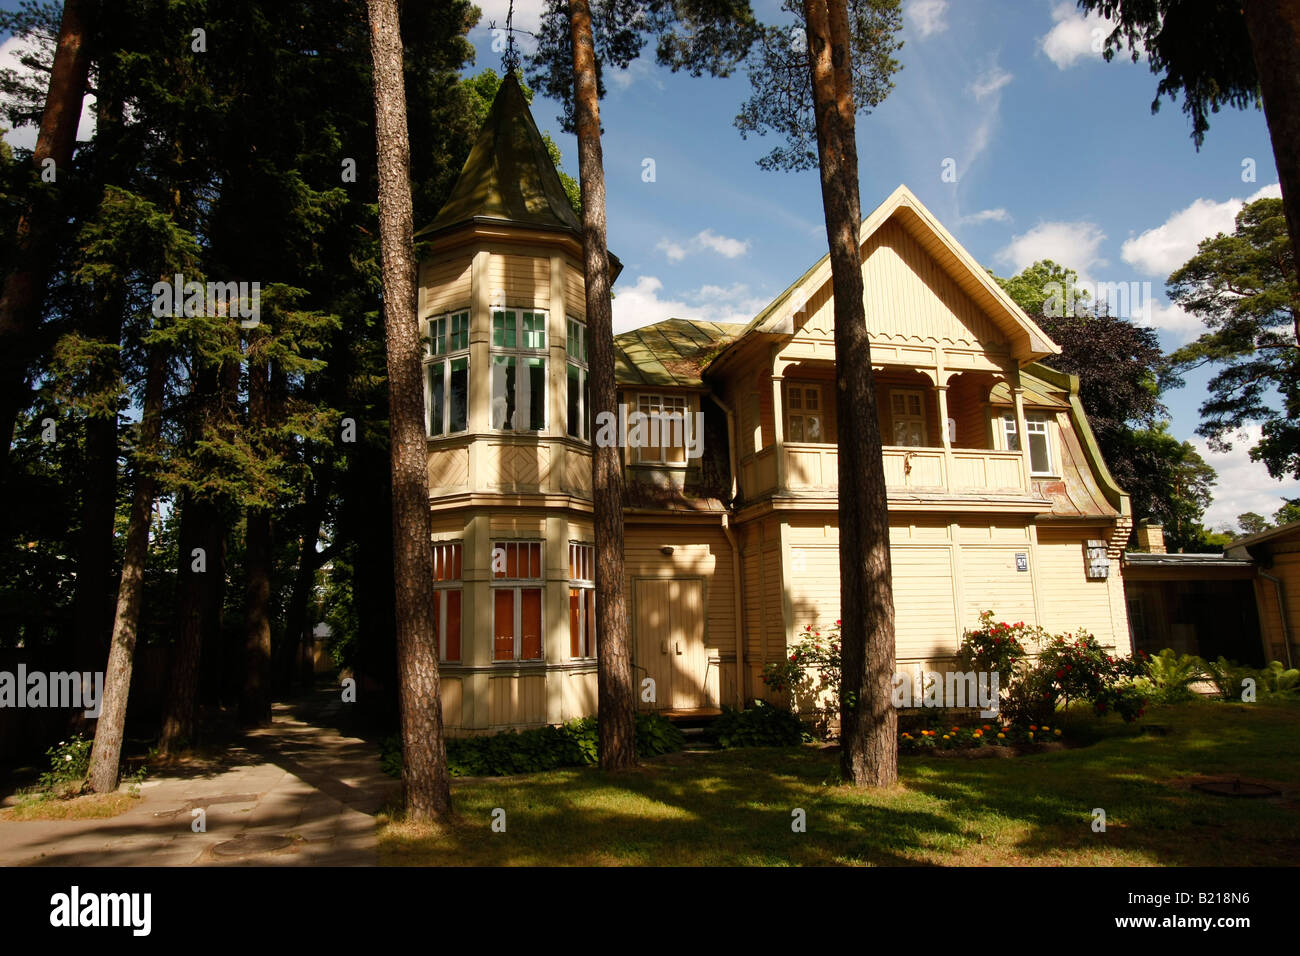 typical wooden home in Jurmala Latvia Baltic states Stock Photo